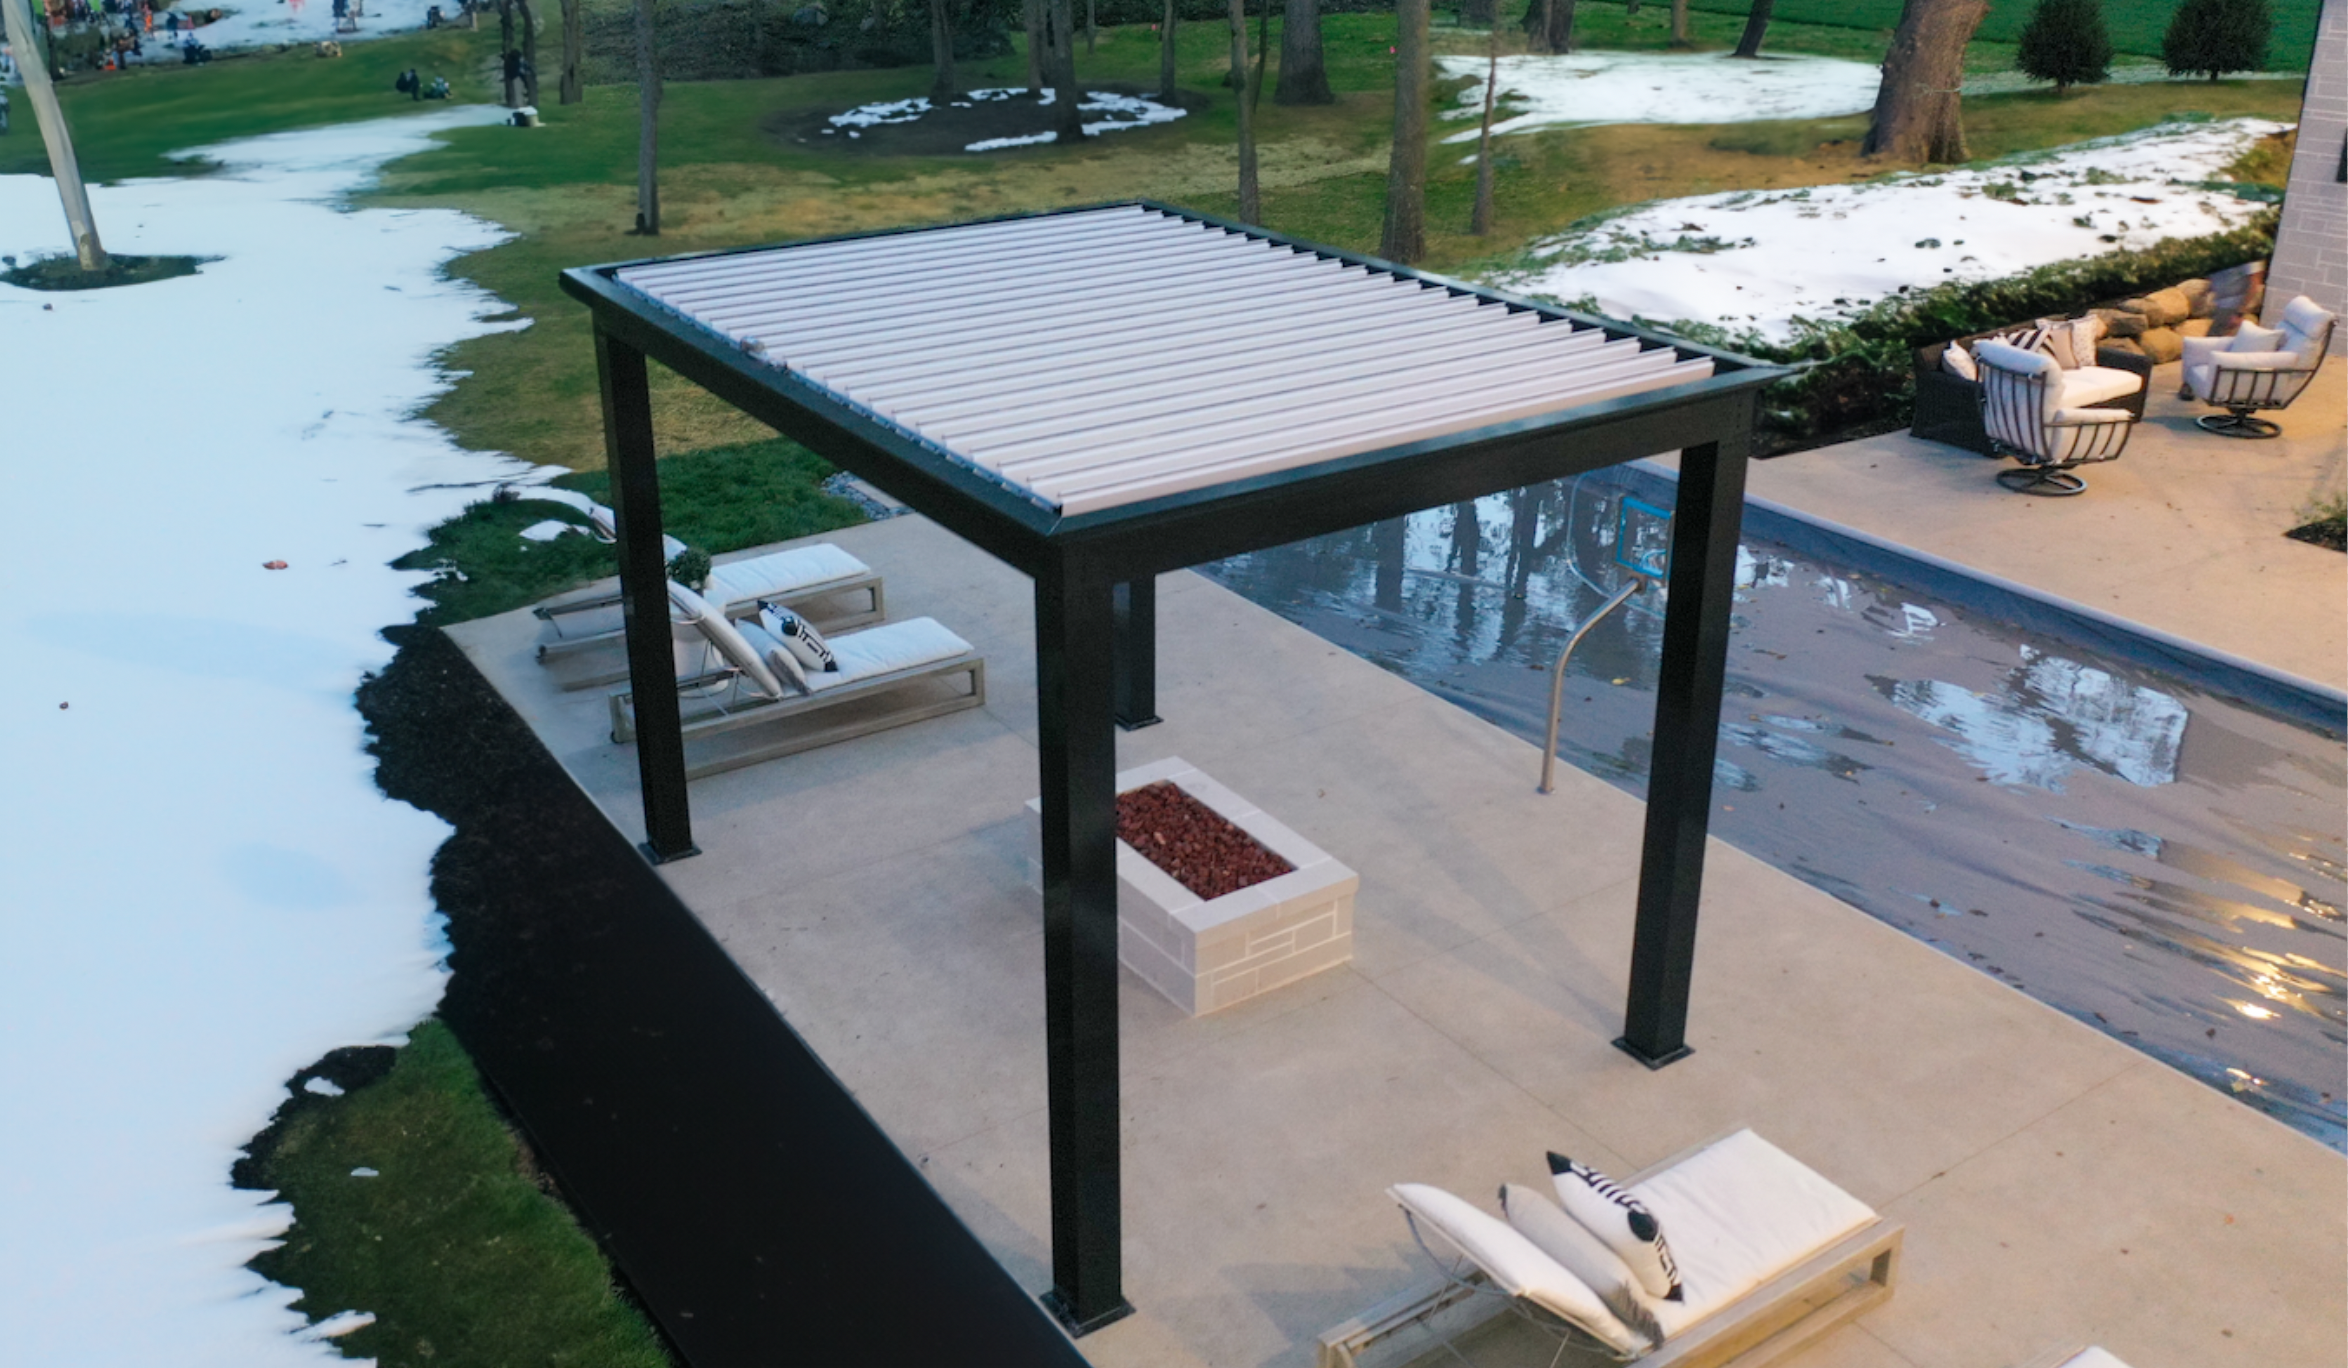 aluminum pergola kit installation costs tend to run cheaper than replacing wooden pergolas after a couple years with natural wood.